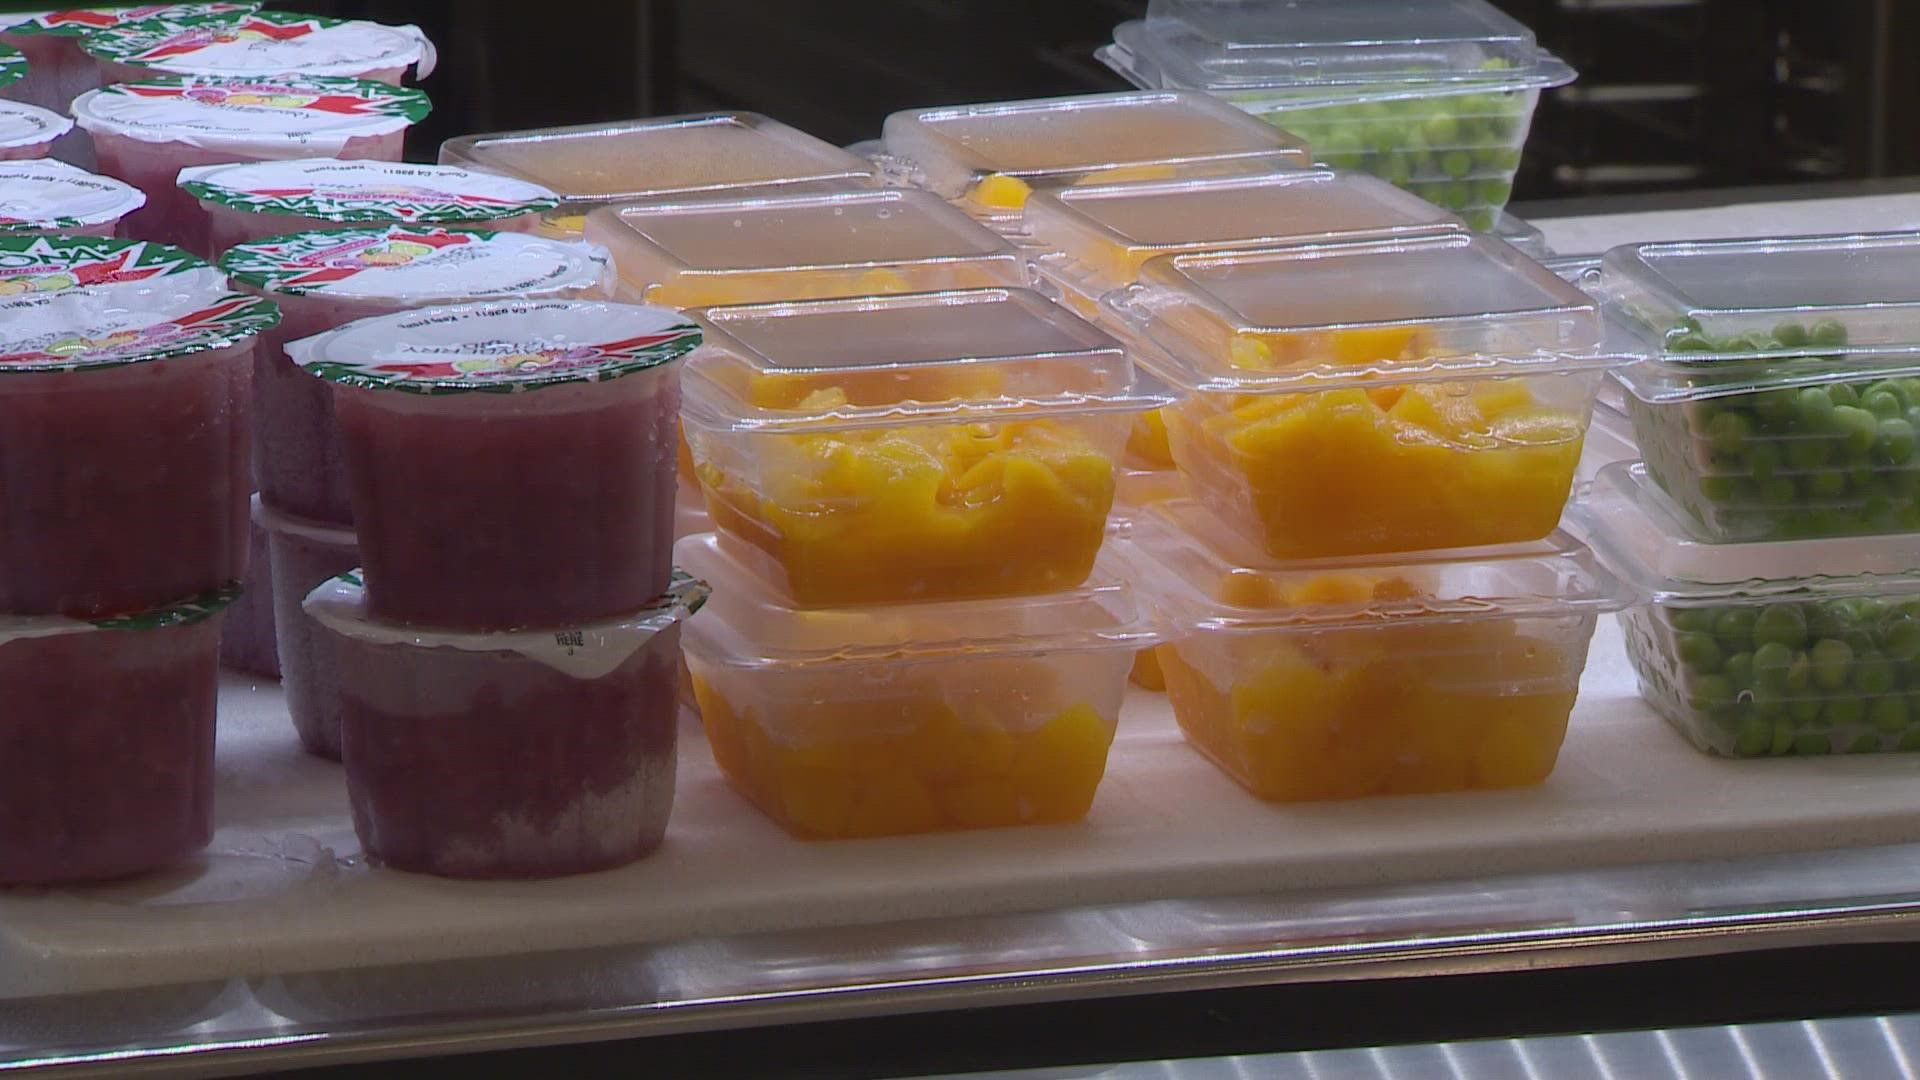 Denton ISD said its finding substitutes for certain food, like turkey chili and cheese sauce.